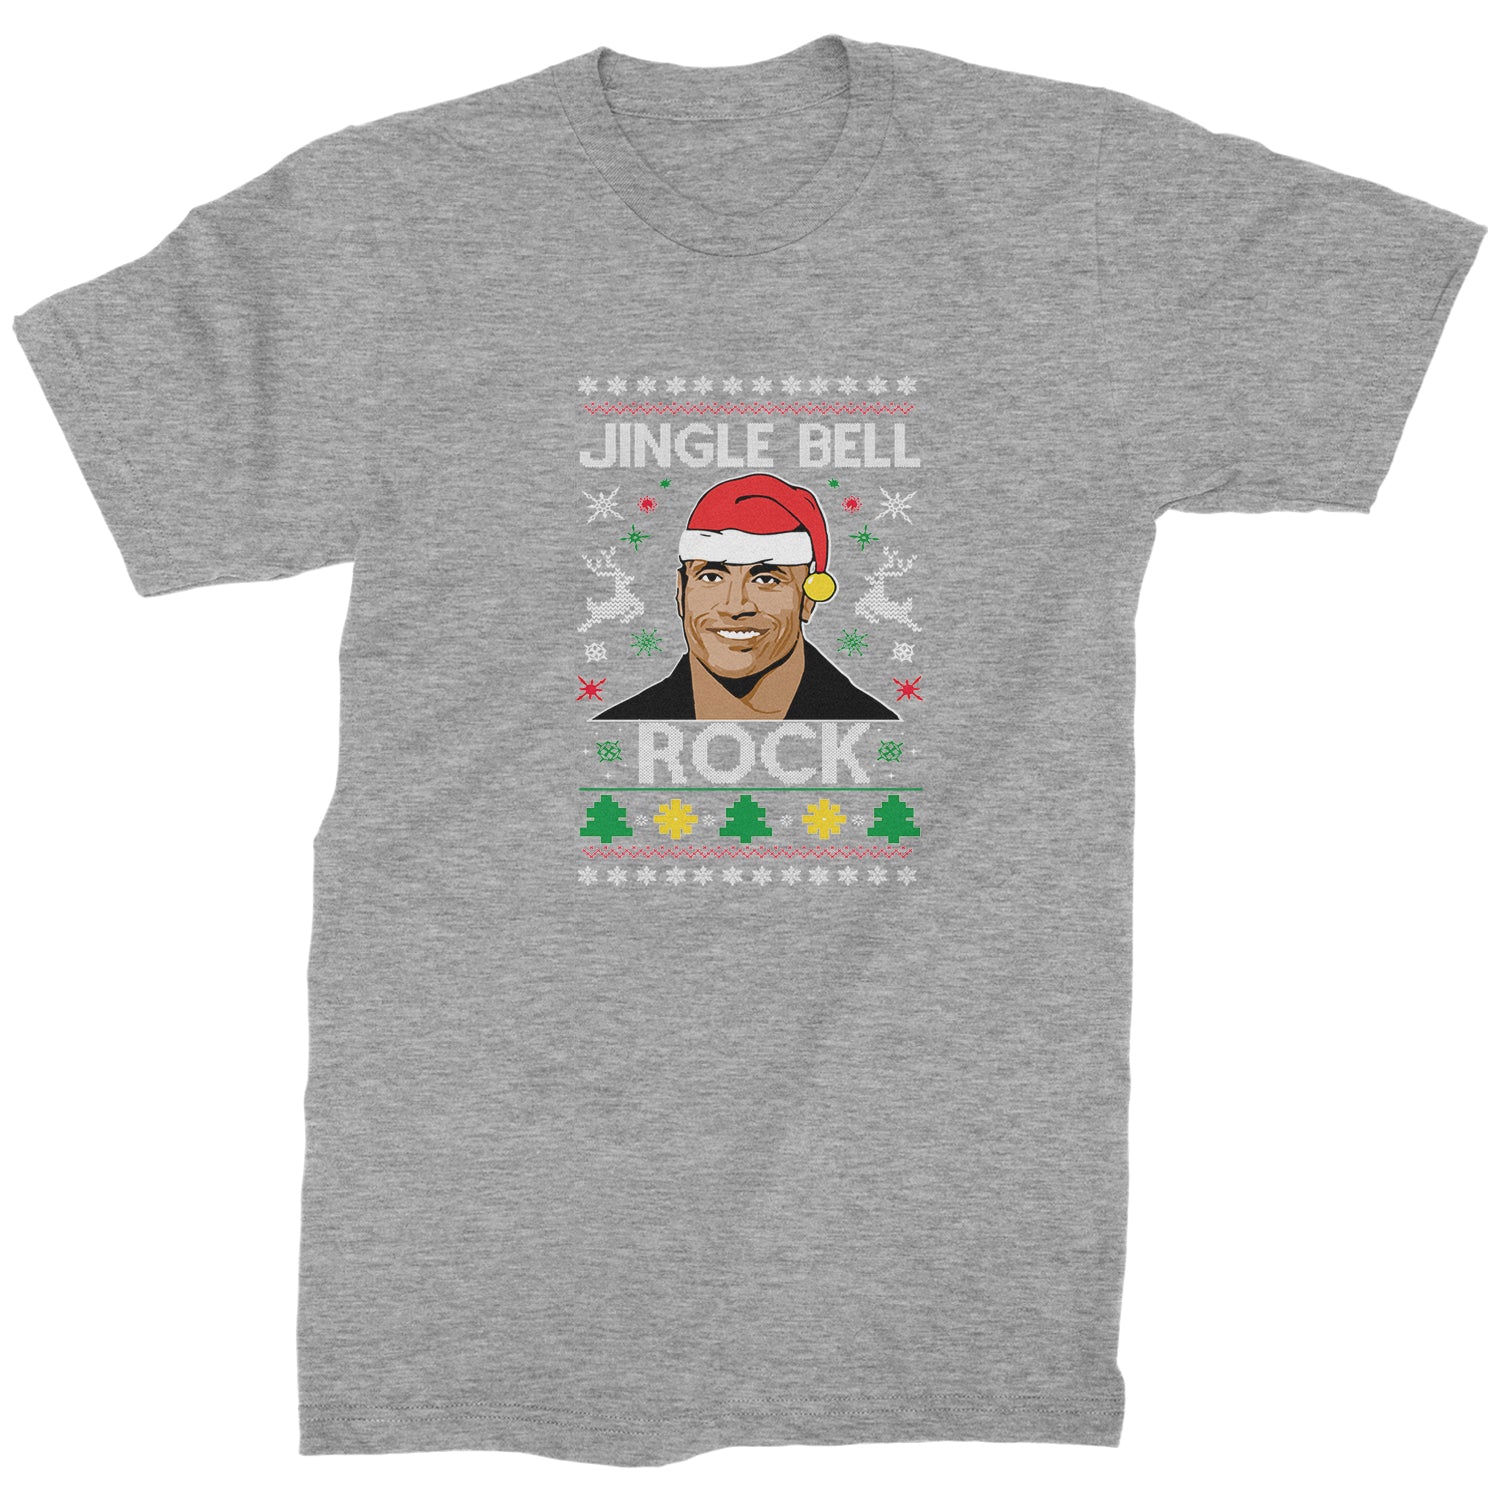 Jingle Bell Rock Ugly Christmas Mens T-shirt 2018, champ, Christmas, dwayne, johnson, peoples, rock, Sweatshirts, the, Ugly by Expression Tees